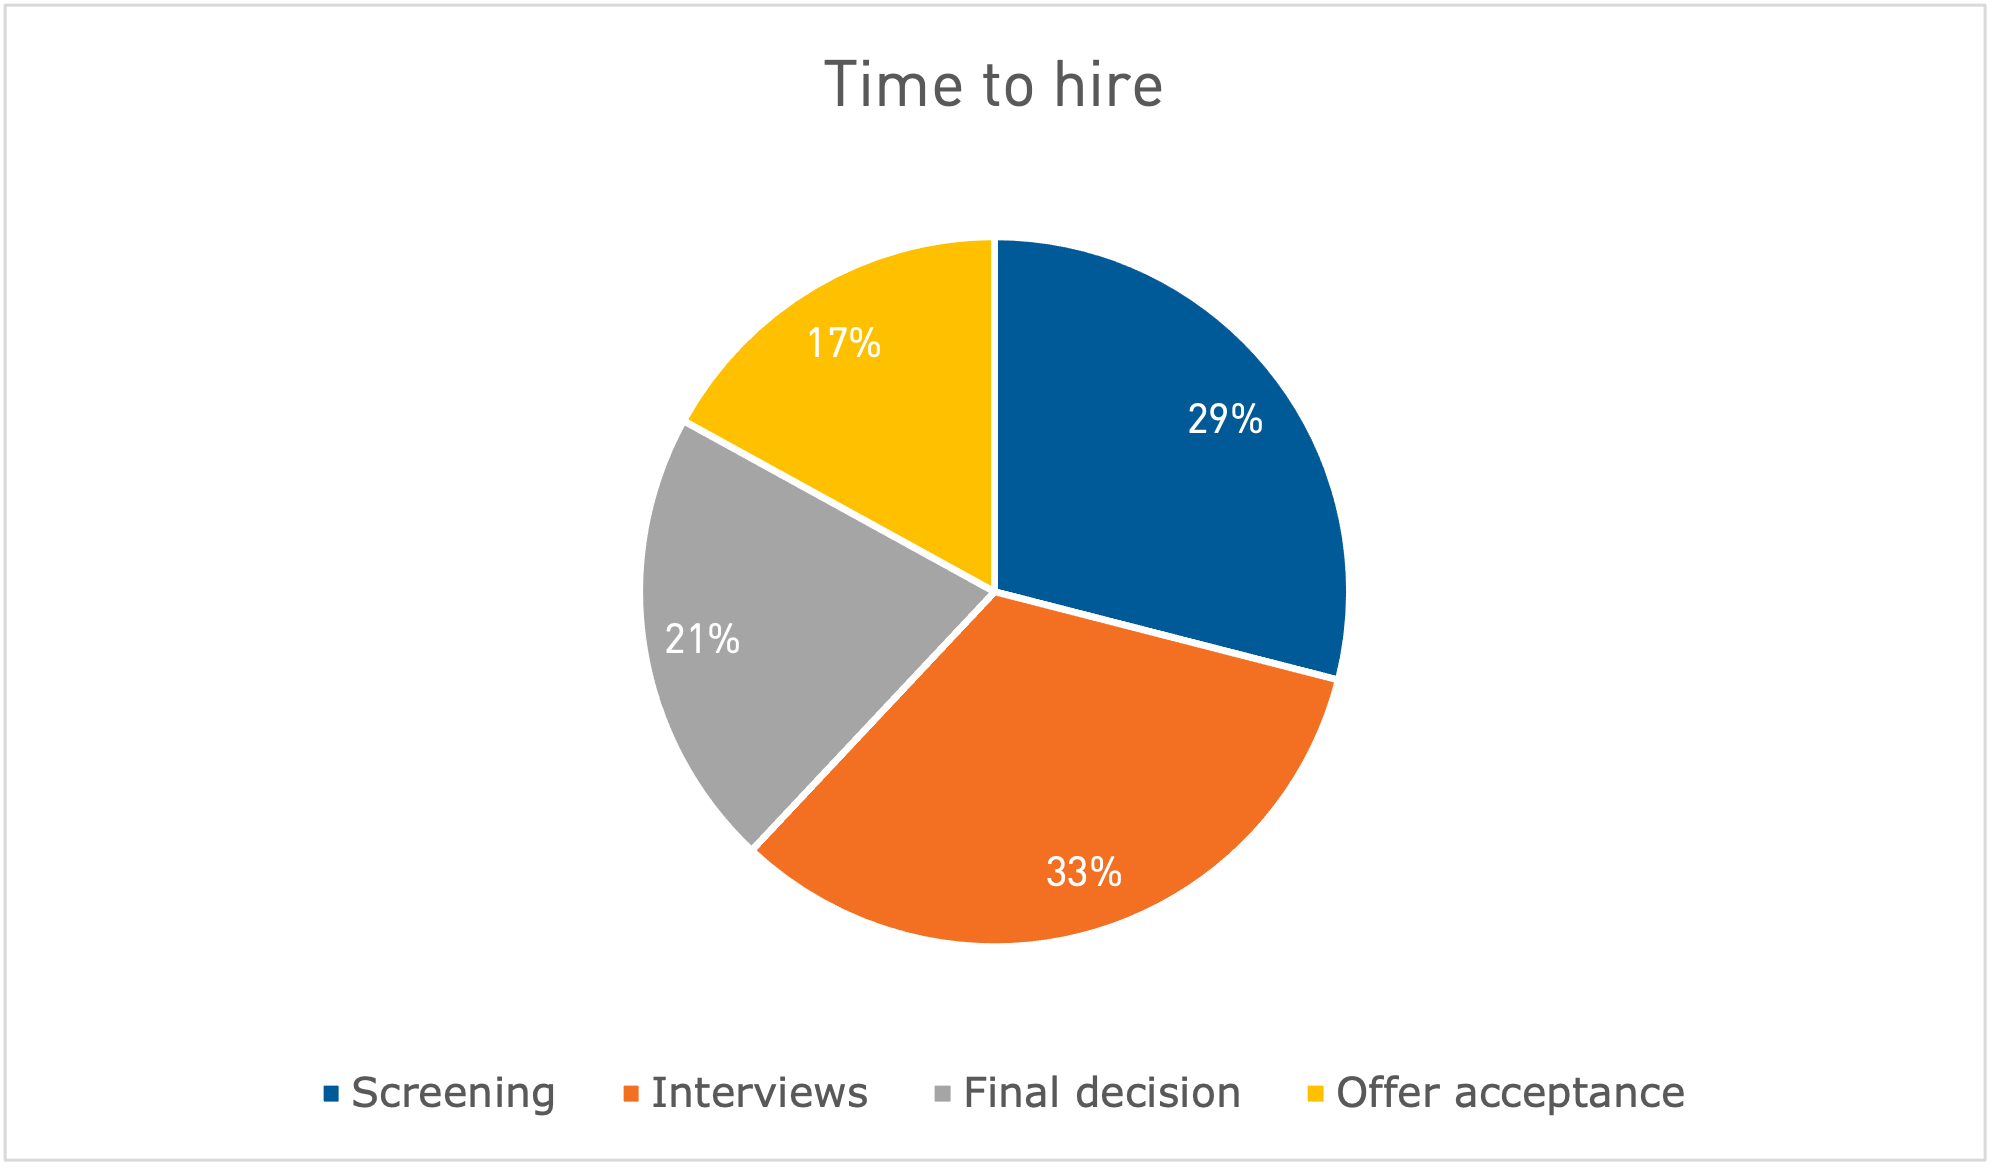 Time to hire pie chart